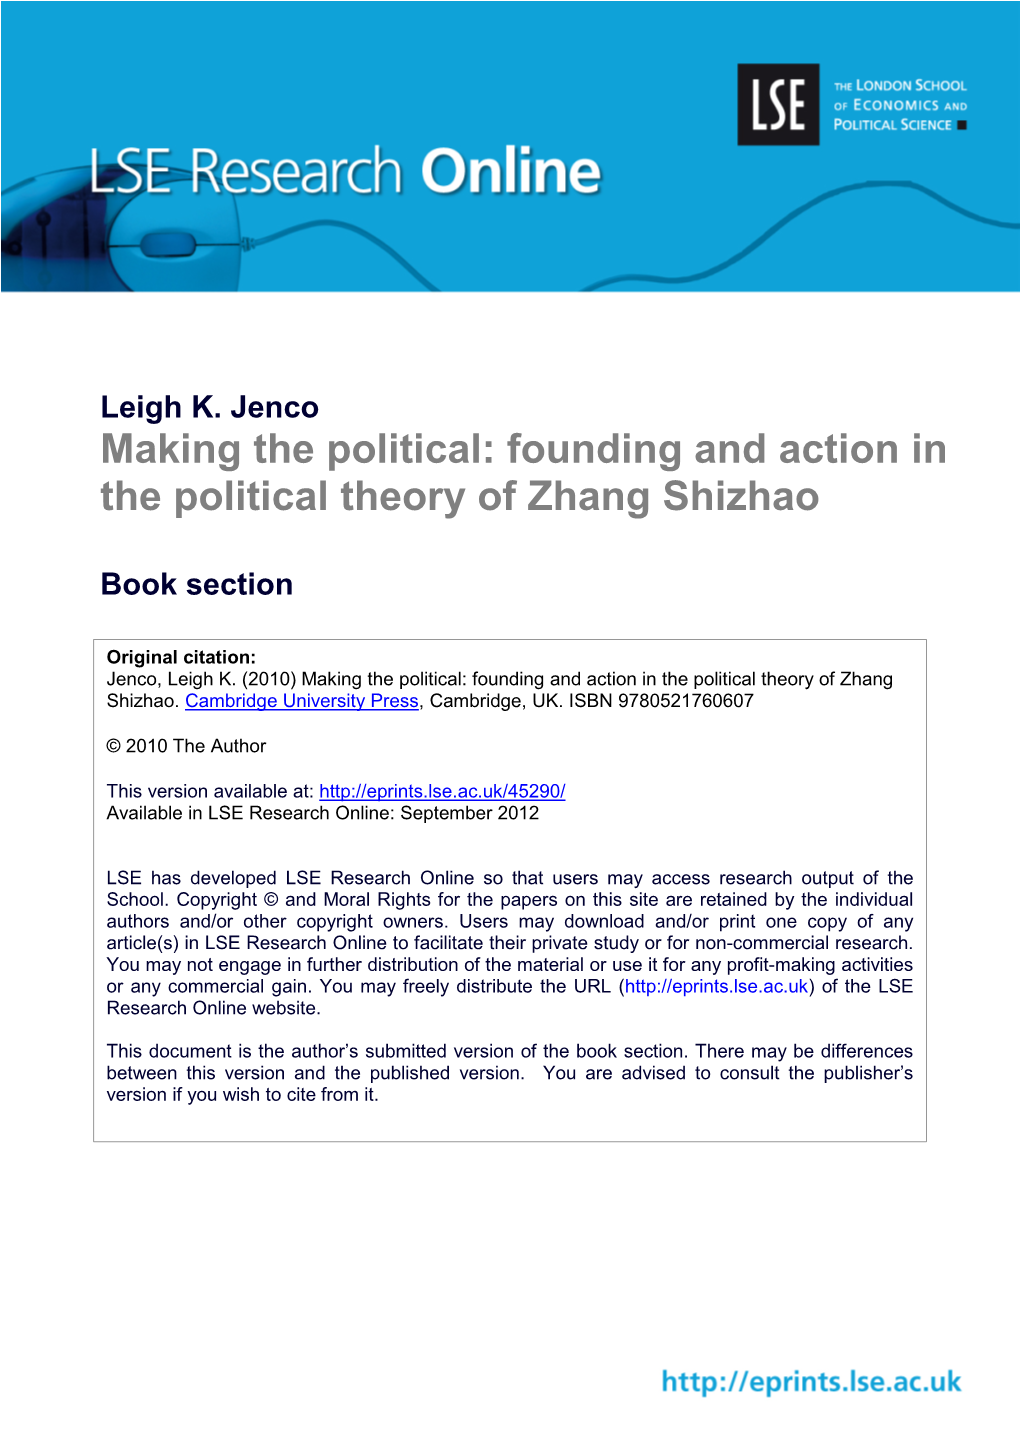 Founding and Action in the Political Theory of Zhang Shizhao